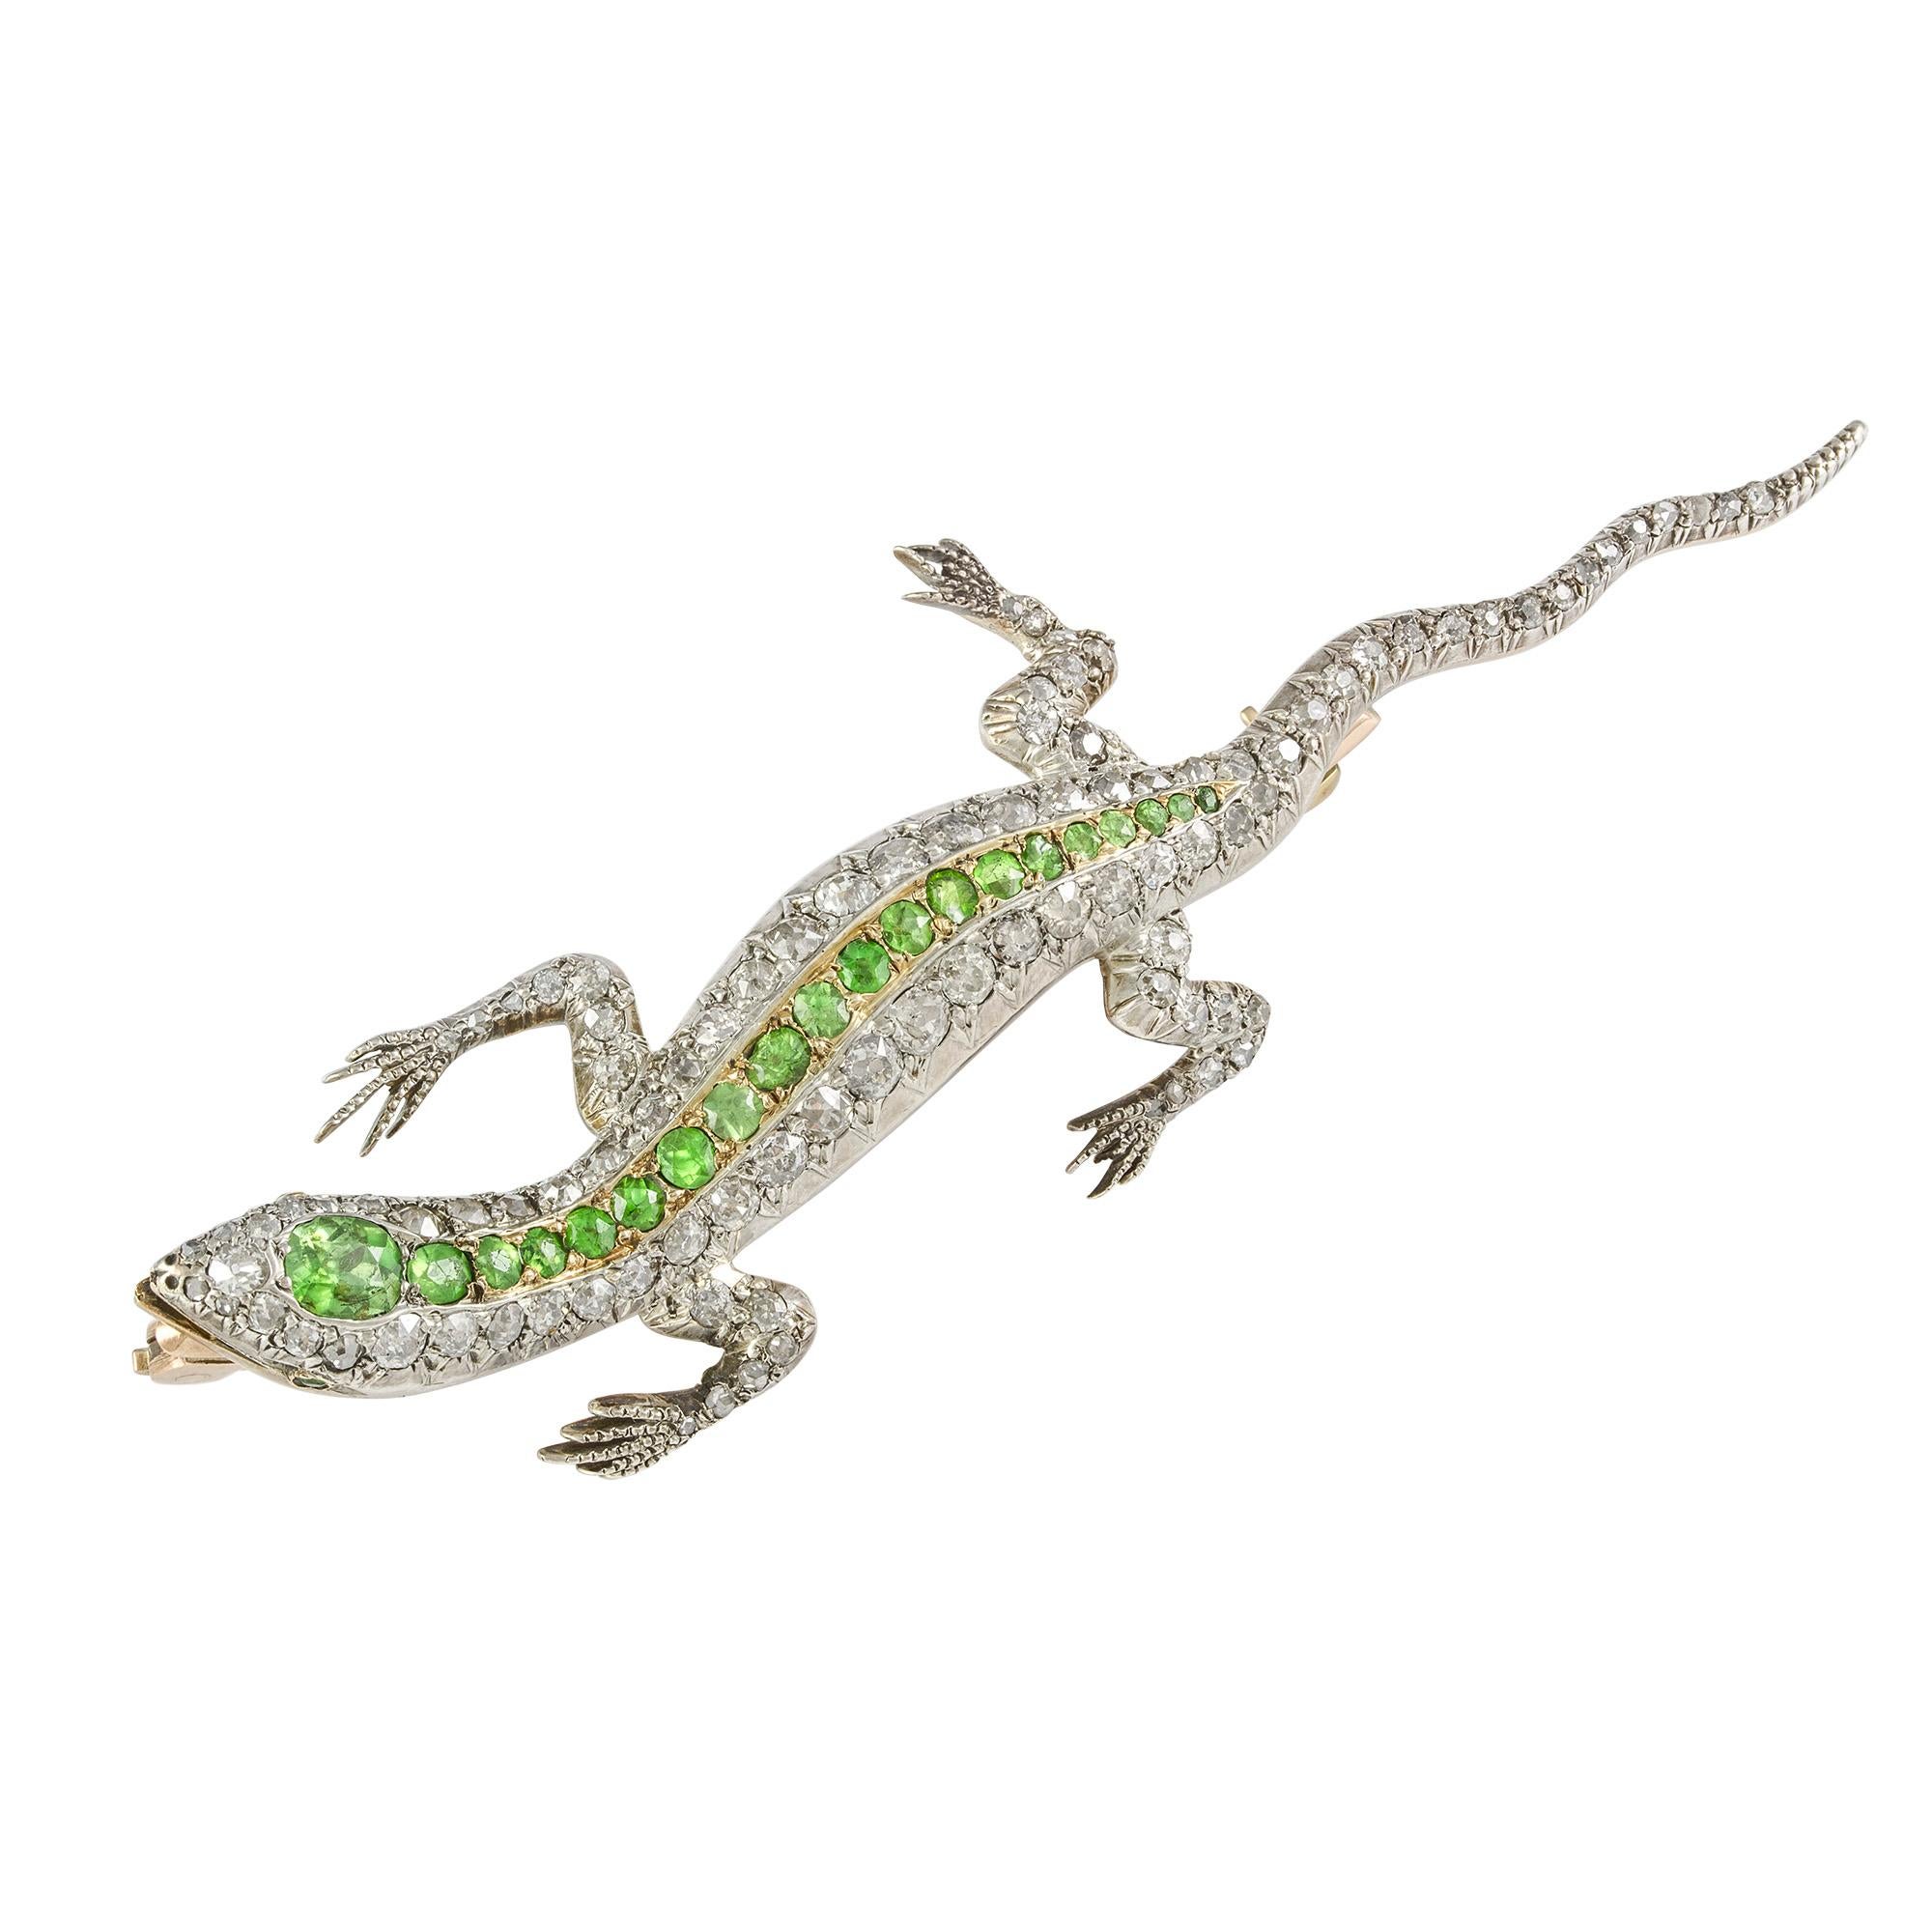 A Victorian demantoid garnet and diamond lizard brooch, the writhing lizard encrusted with old brilliant-cut diamonds, estimated to weigh a total of 2.65 carats, silver claw-set to a yellow gold mount, set with a central streak of round-shaped